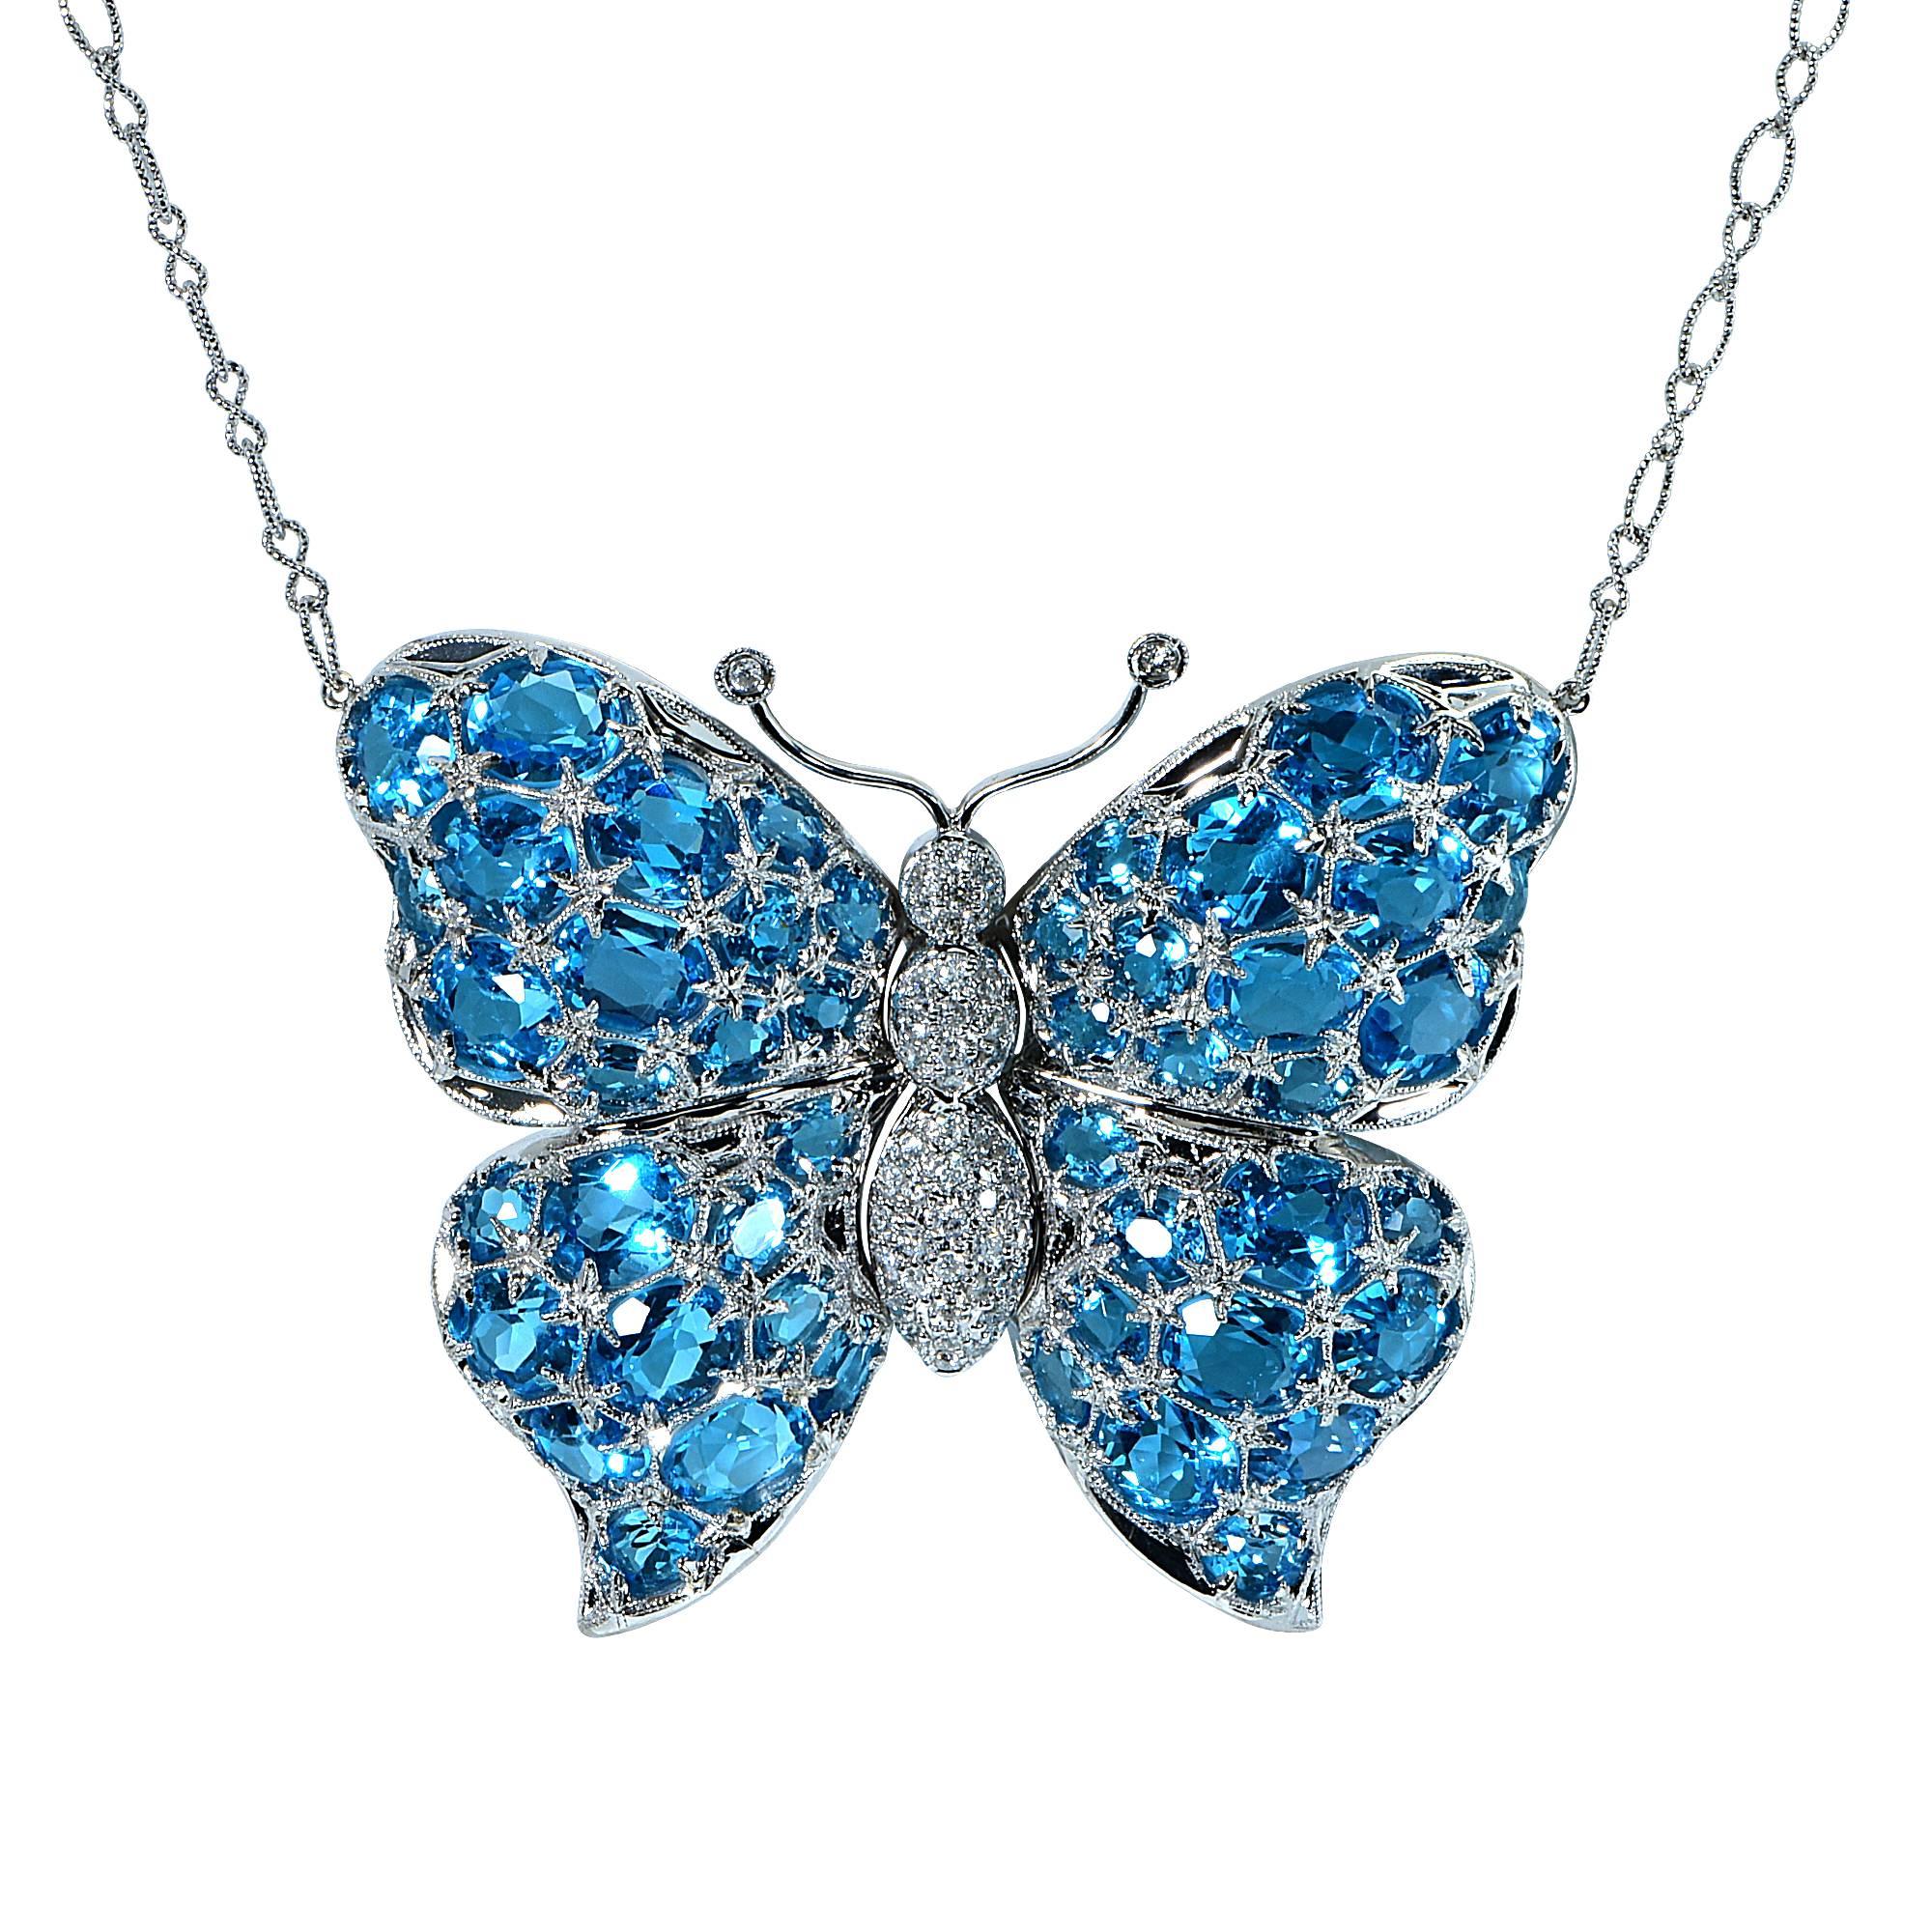 18k white gold butterfly necklace featuring 47 electric blue topaz weighing approximately 75cts total accented by 43 round brilliant cut diamonds weighing .65cst total, G color SI clarity.

It is stamped and/or tested as 18k gold.
The metal weight